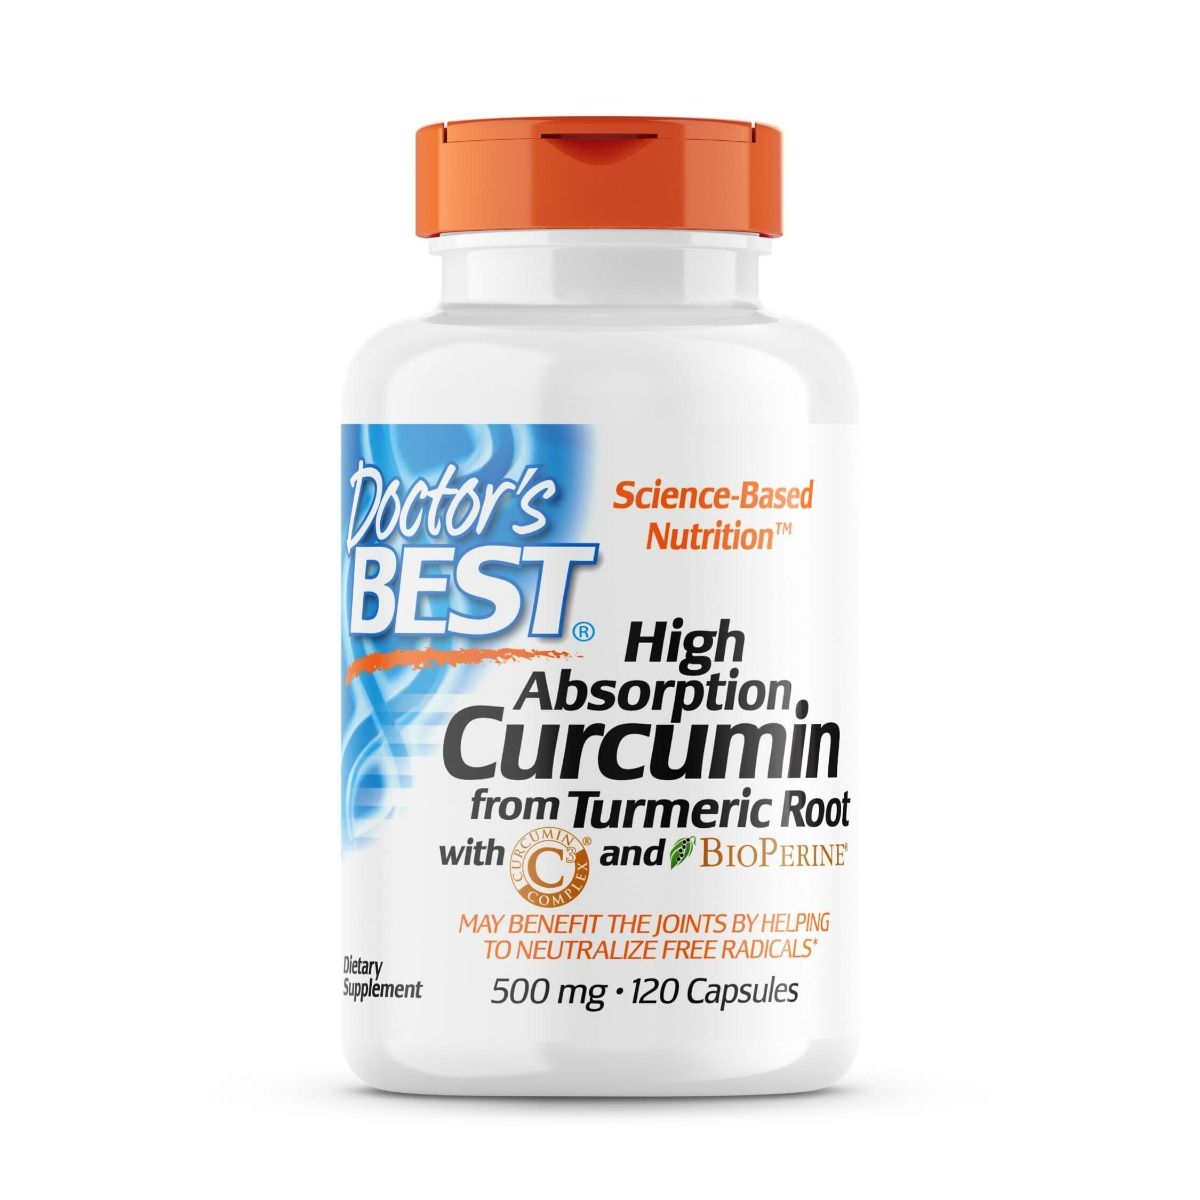 Photos - Vitamins & Minerals Doctors Best Doctor's Best High Absorption Curcumin 500 mg 120 Capsules PBW-P2290 